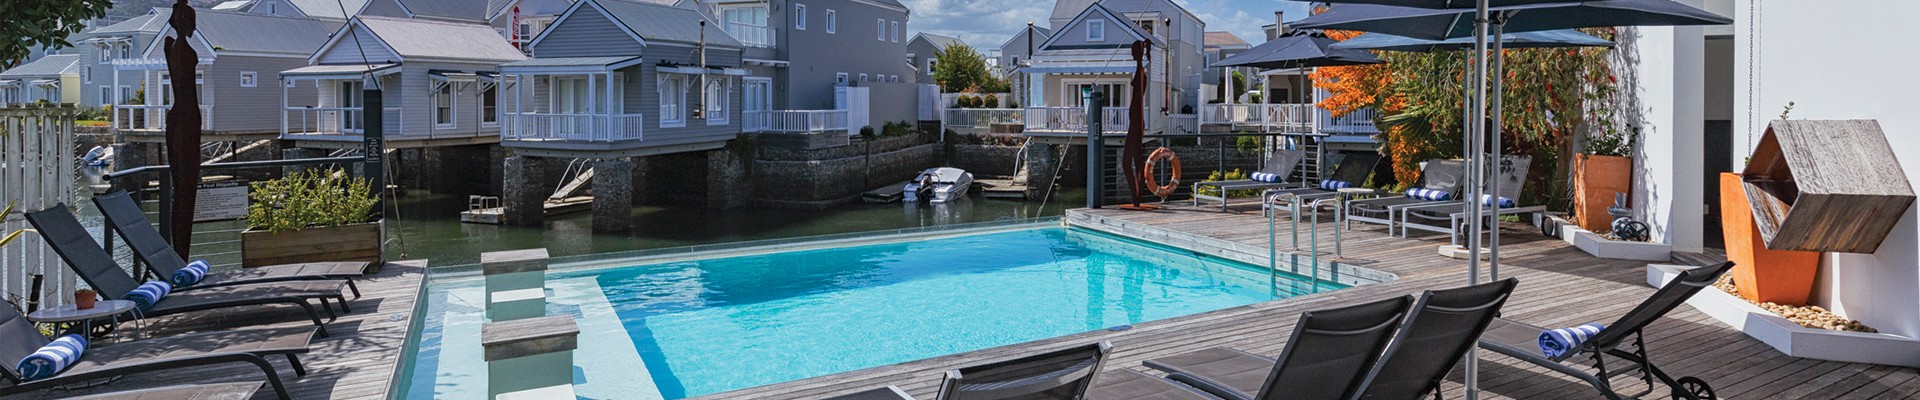 5* The Turbine Boutique Hotel and Spa - Knysna Package (2 nights)